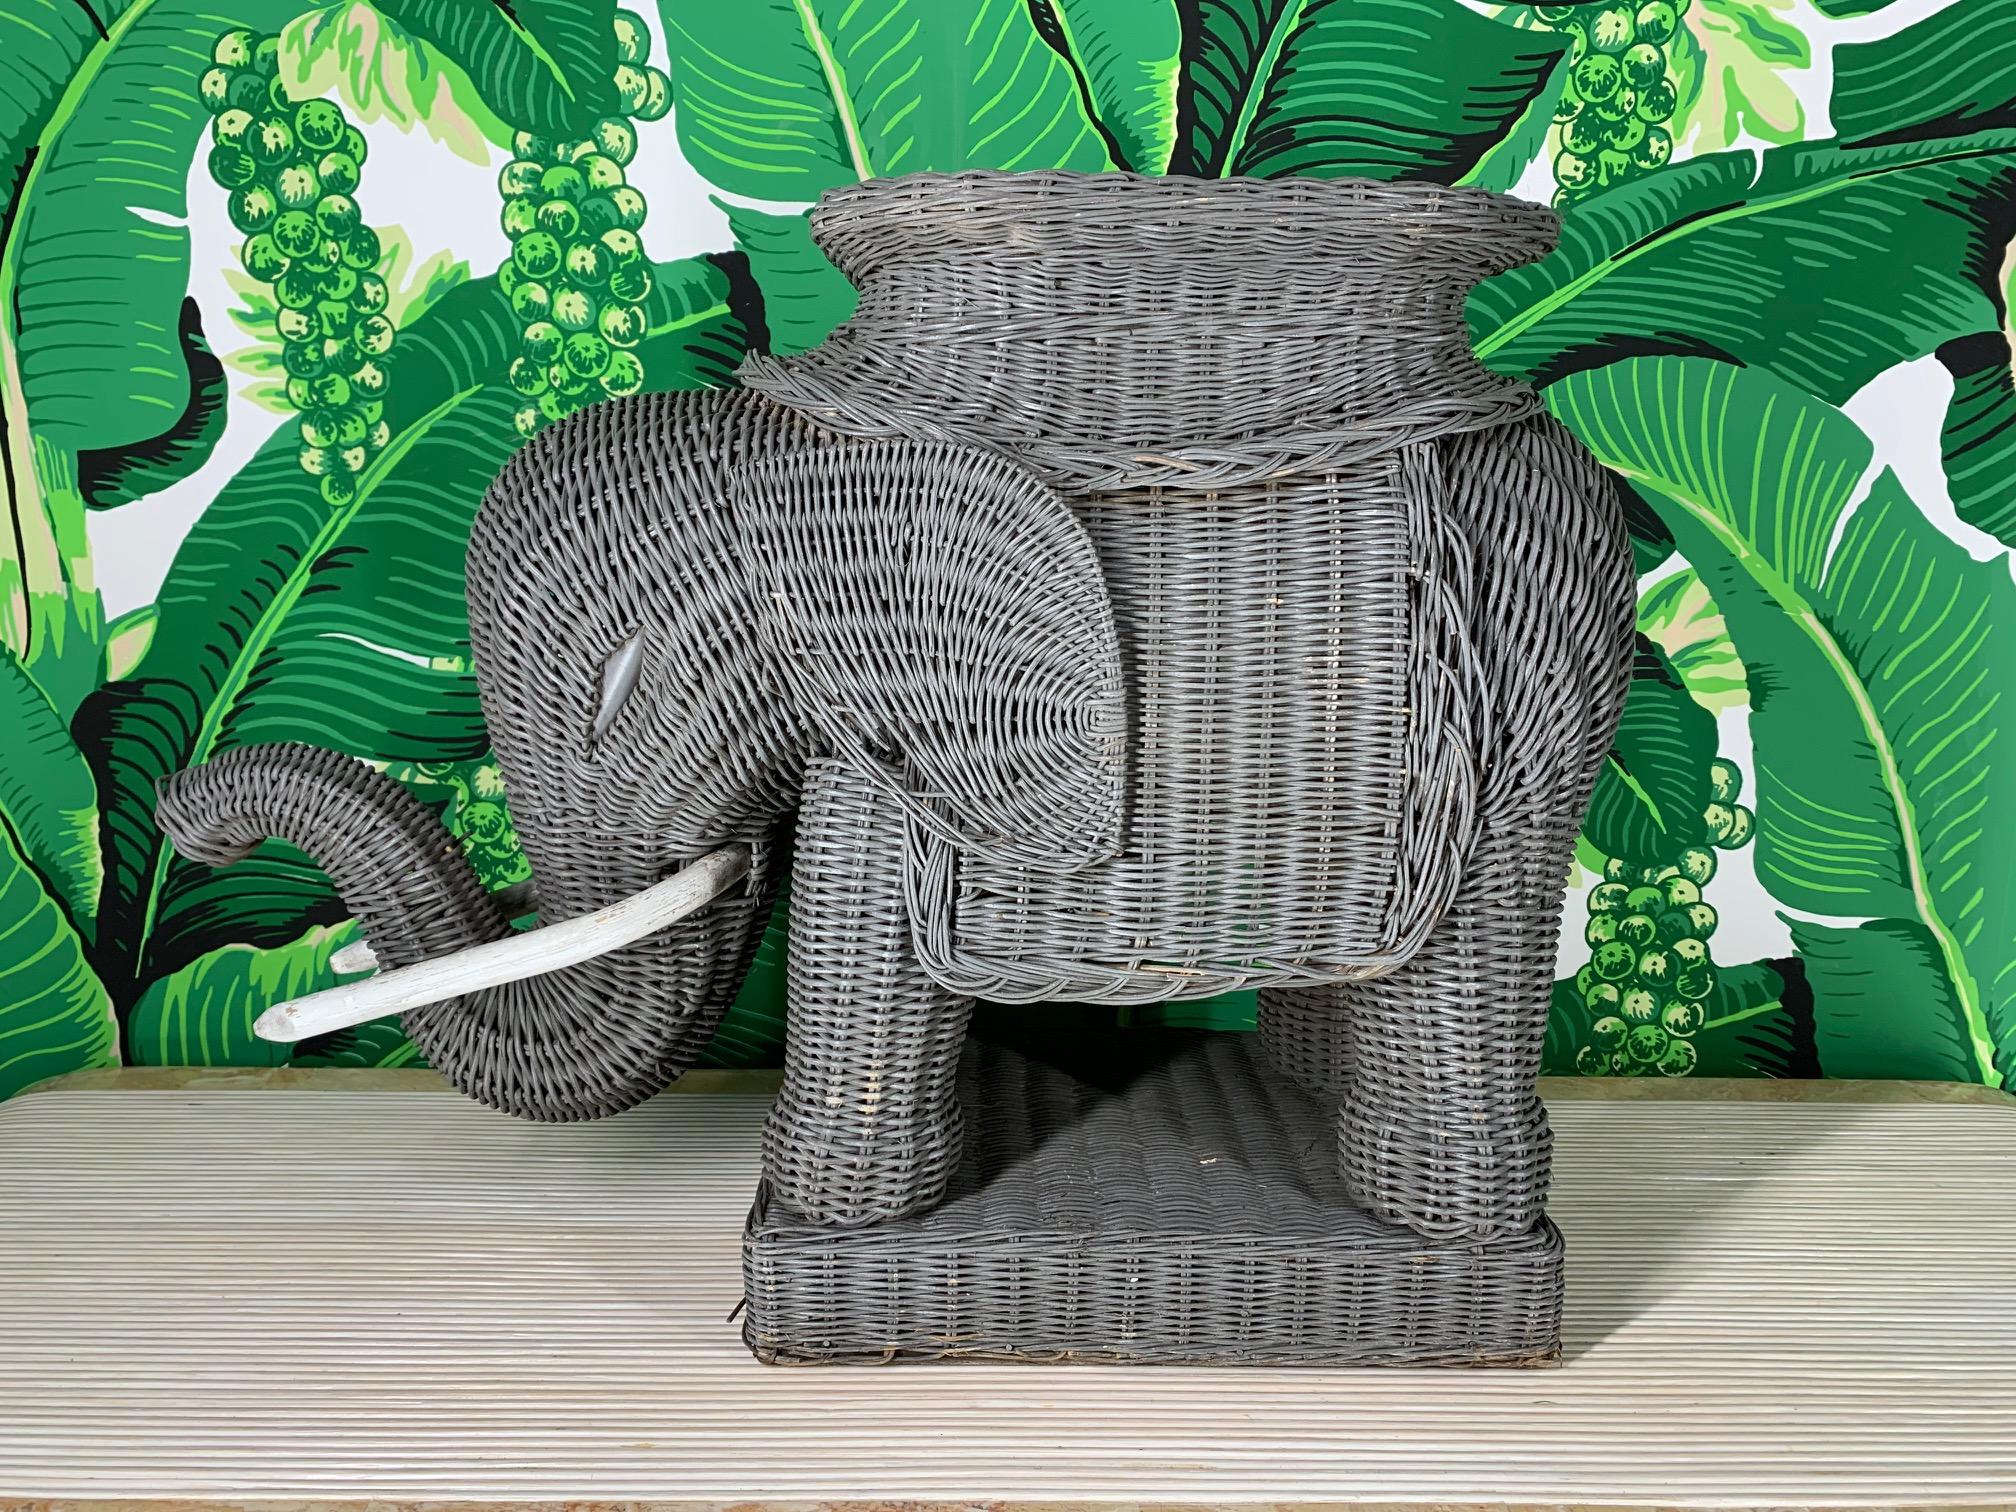 Vintage 1960s-1970s woven wicker elephant garden stool/side table in excellent condition. Rigid wood frame construction with densely woven sculpted wicker. Wooden tusks and plinth style base. Very good condition.